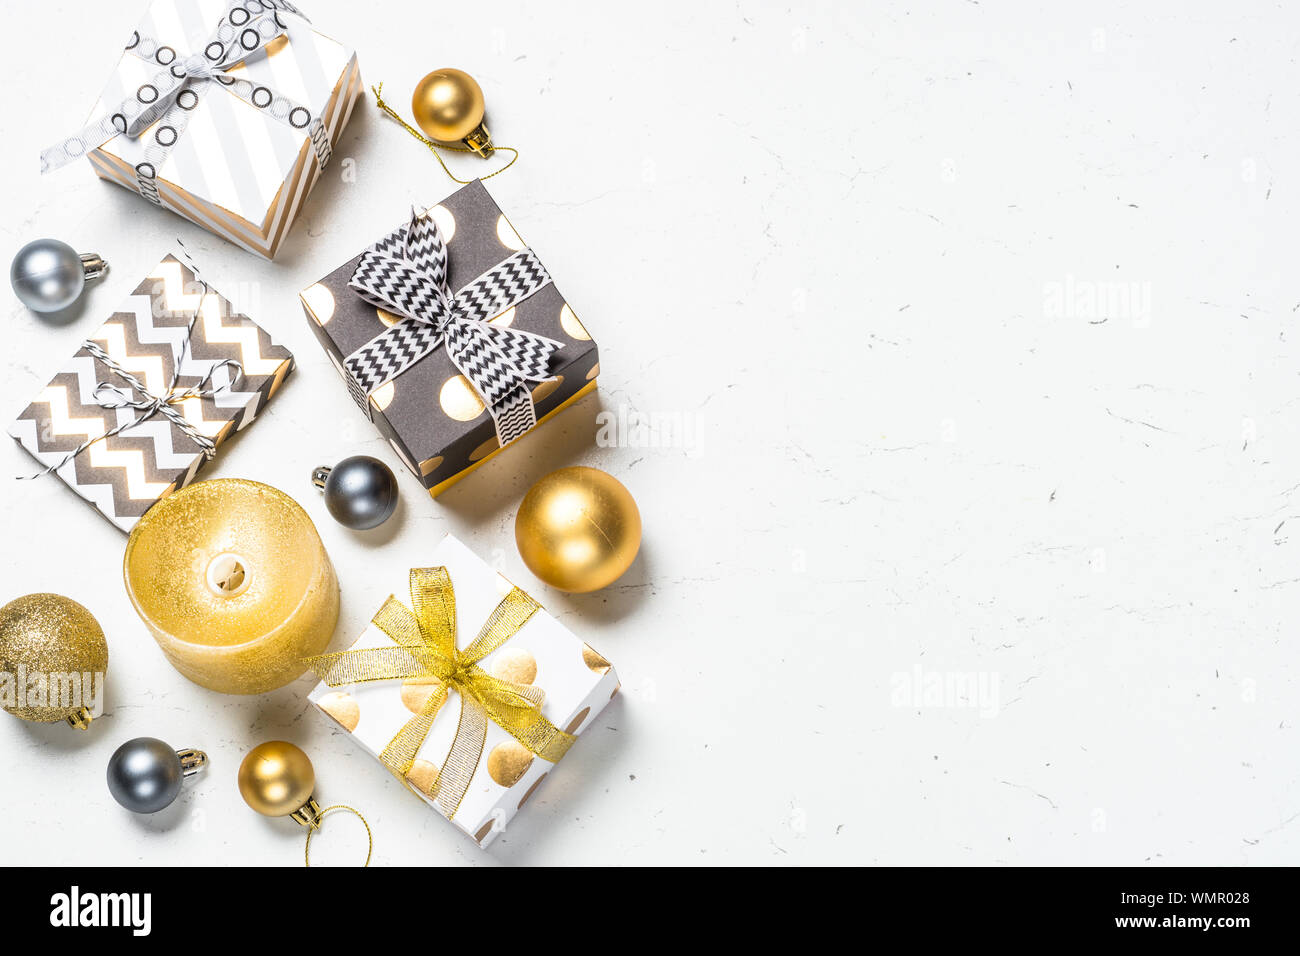 Christmas background with Gold present box and decorations. Stock Photo